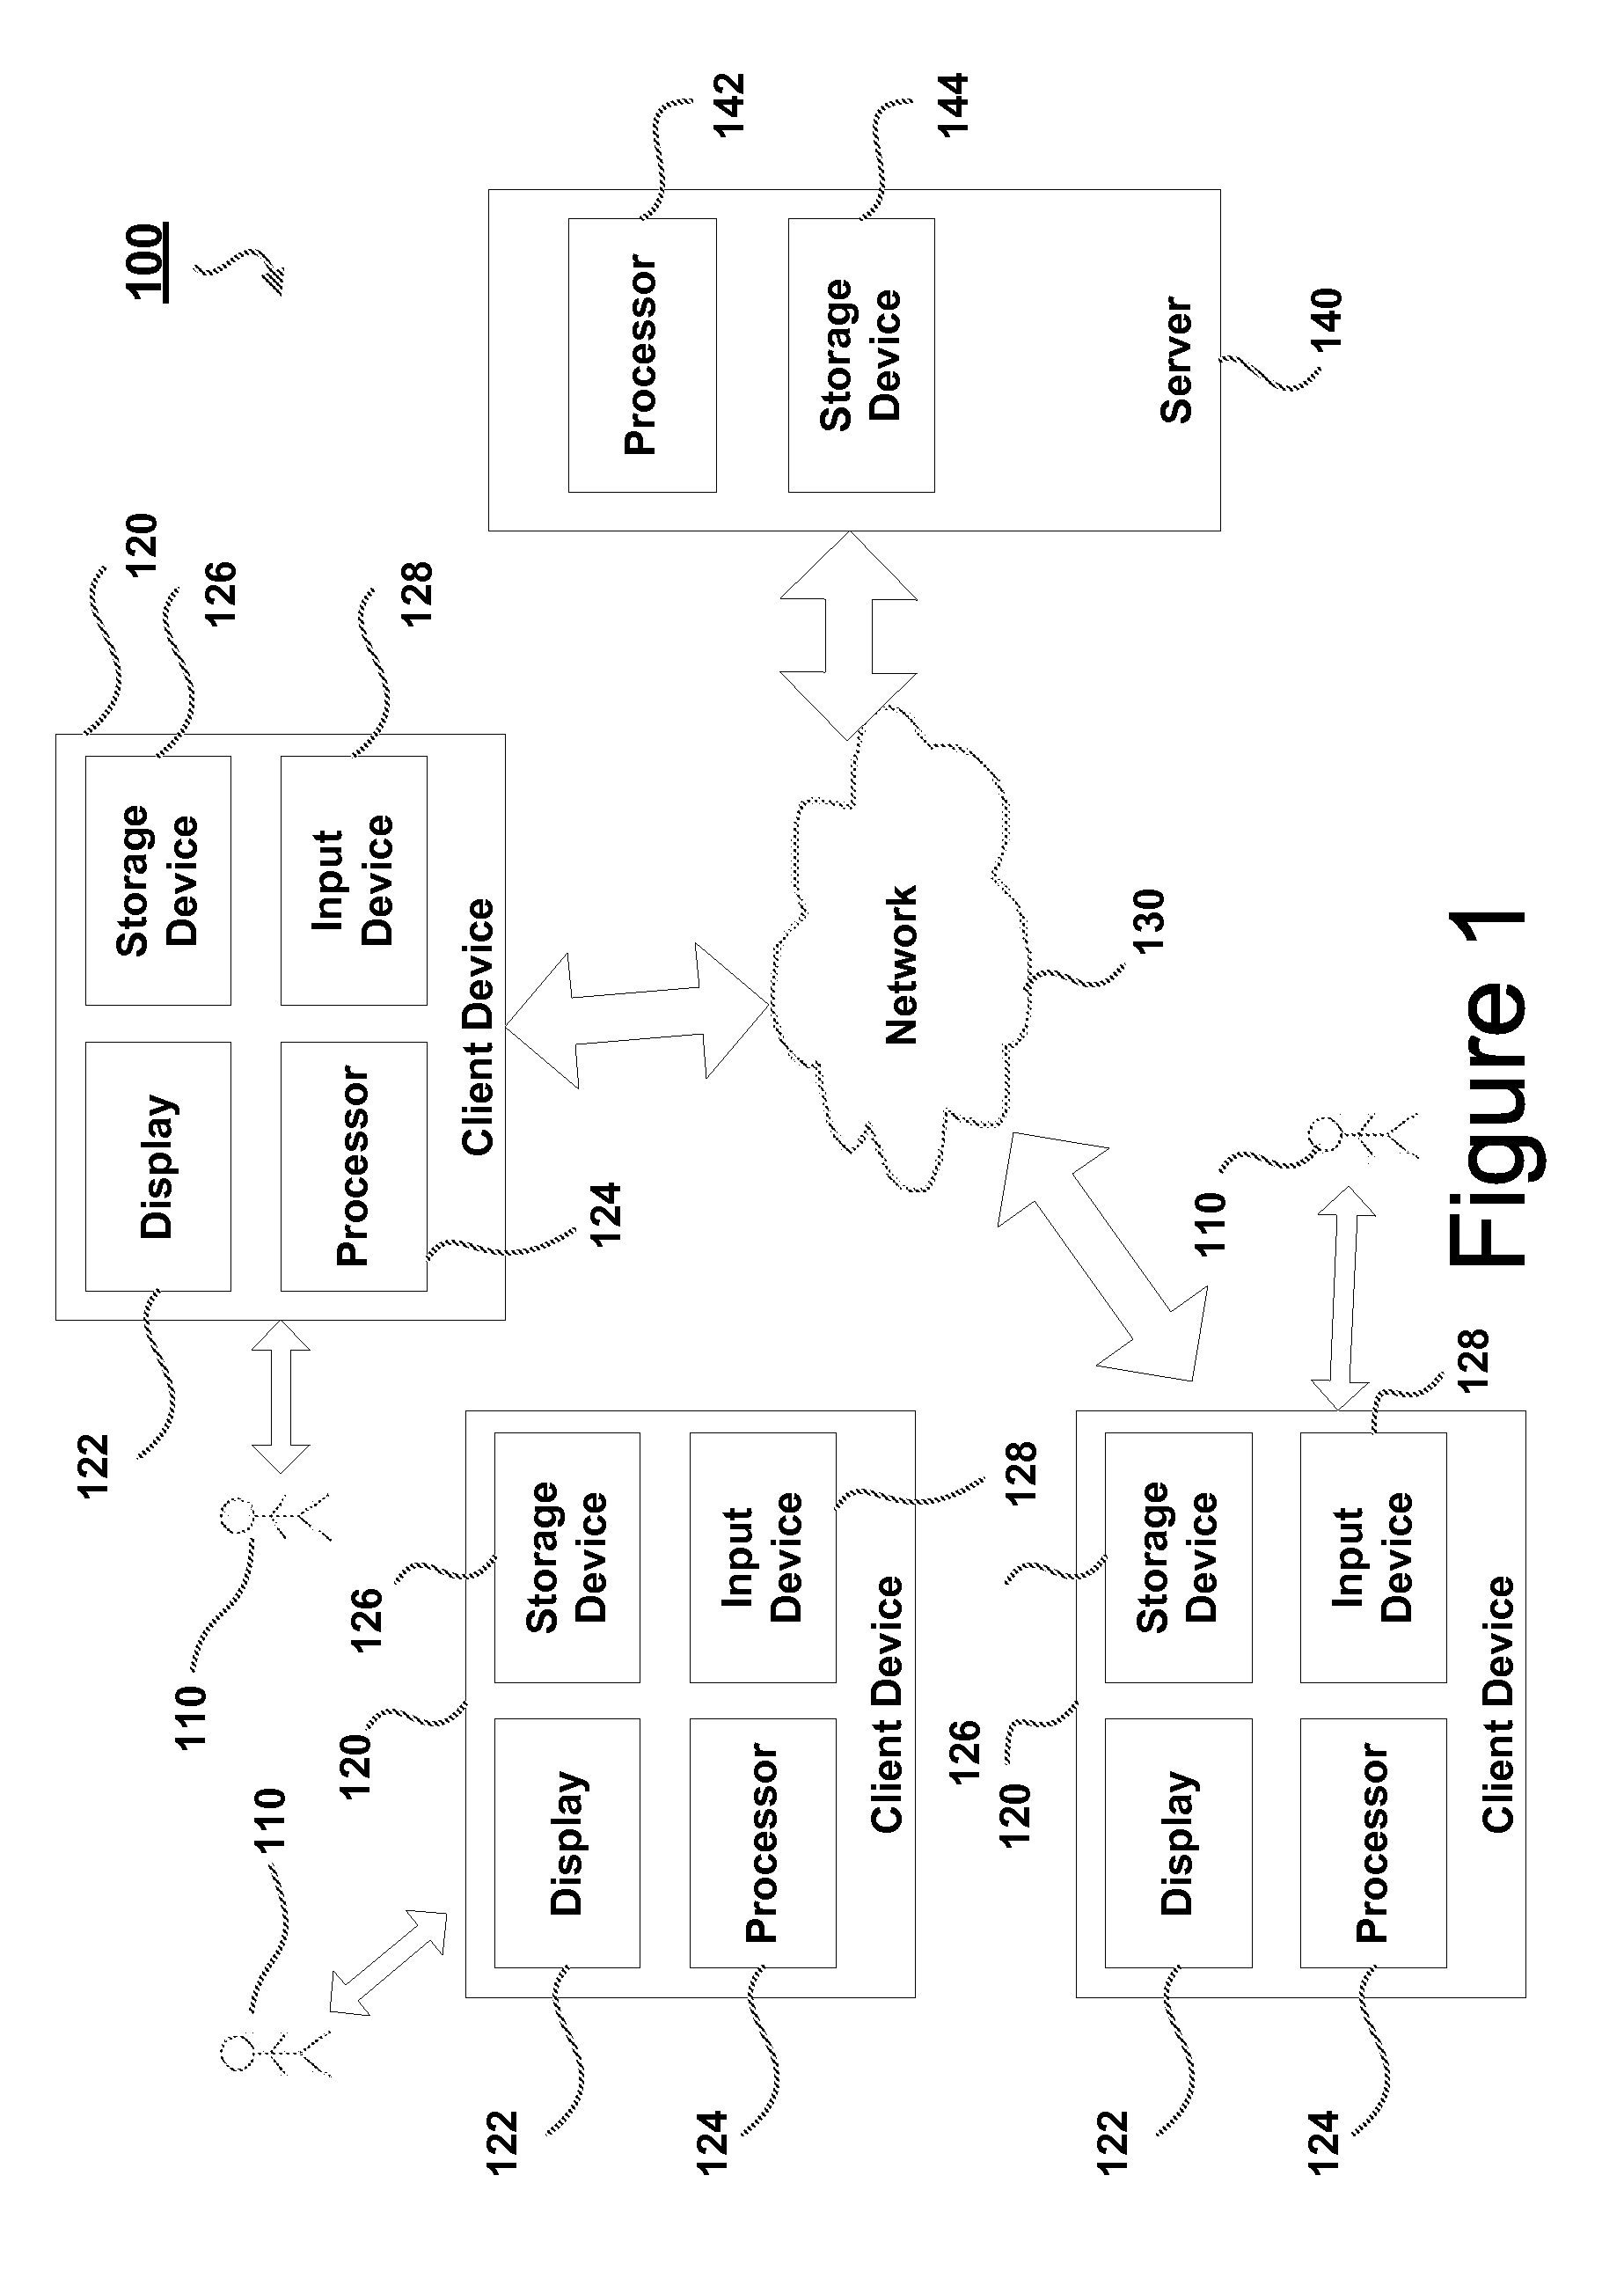 Systems and methods for generating and updating electronic medical records